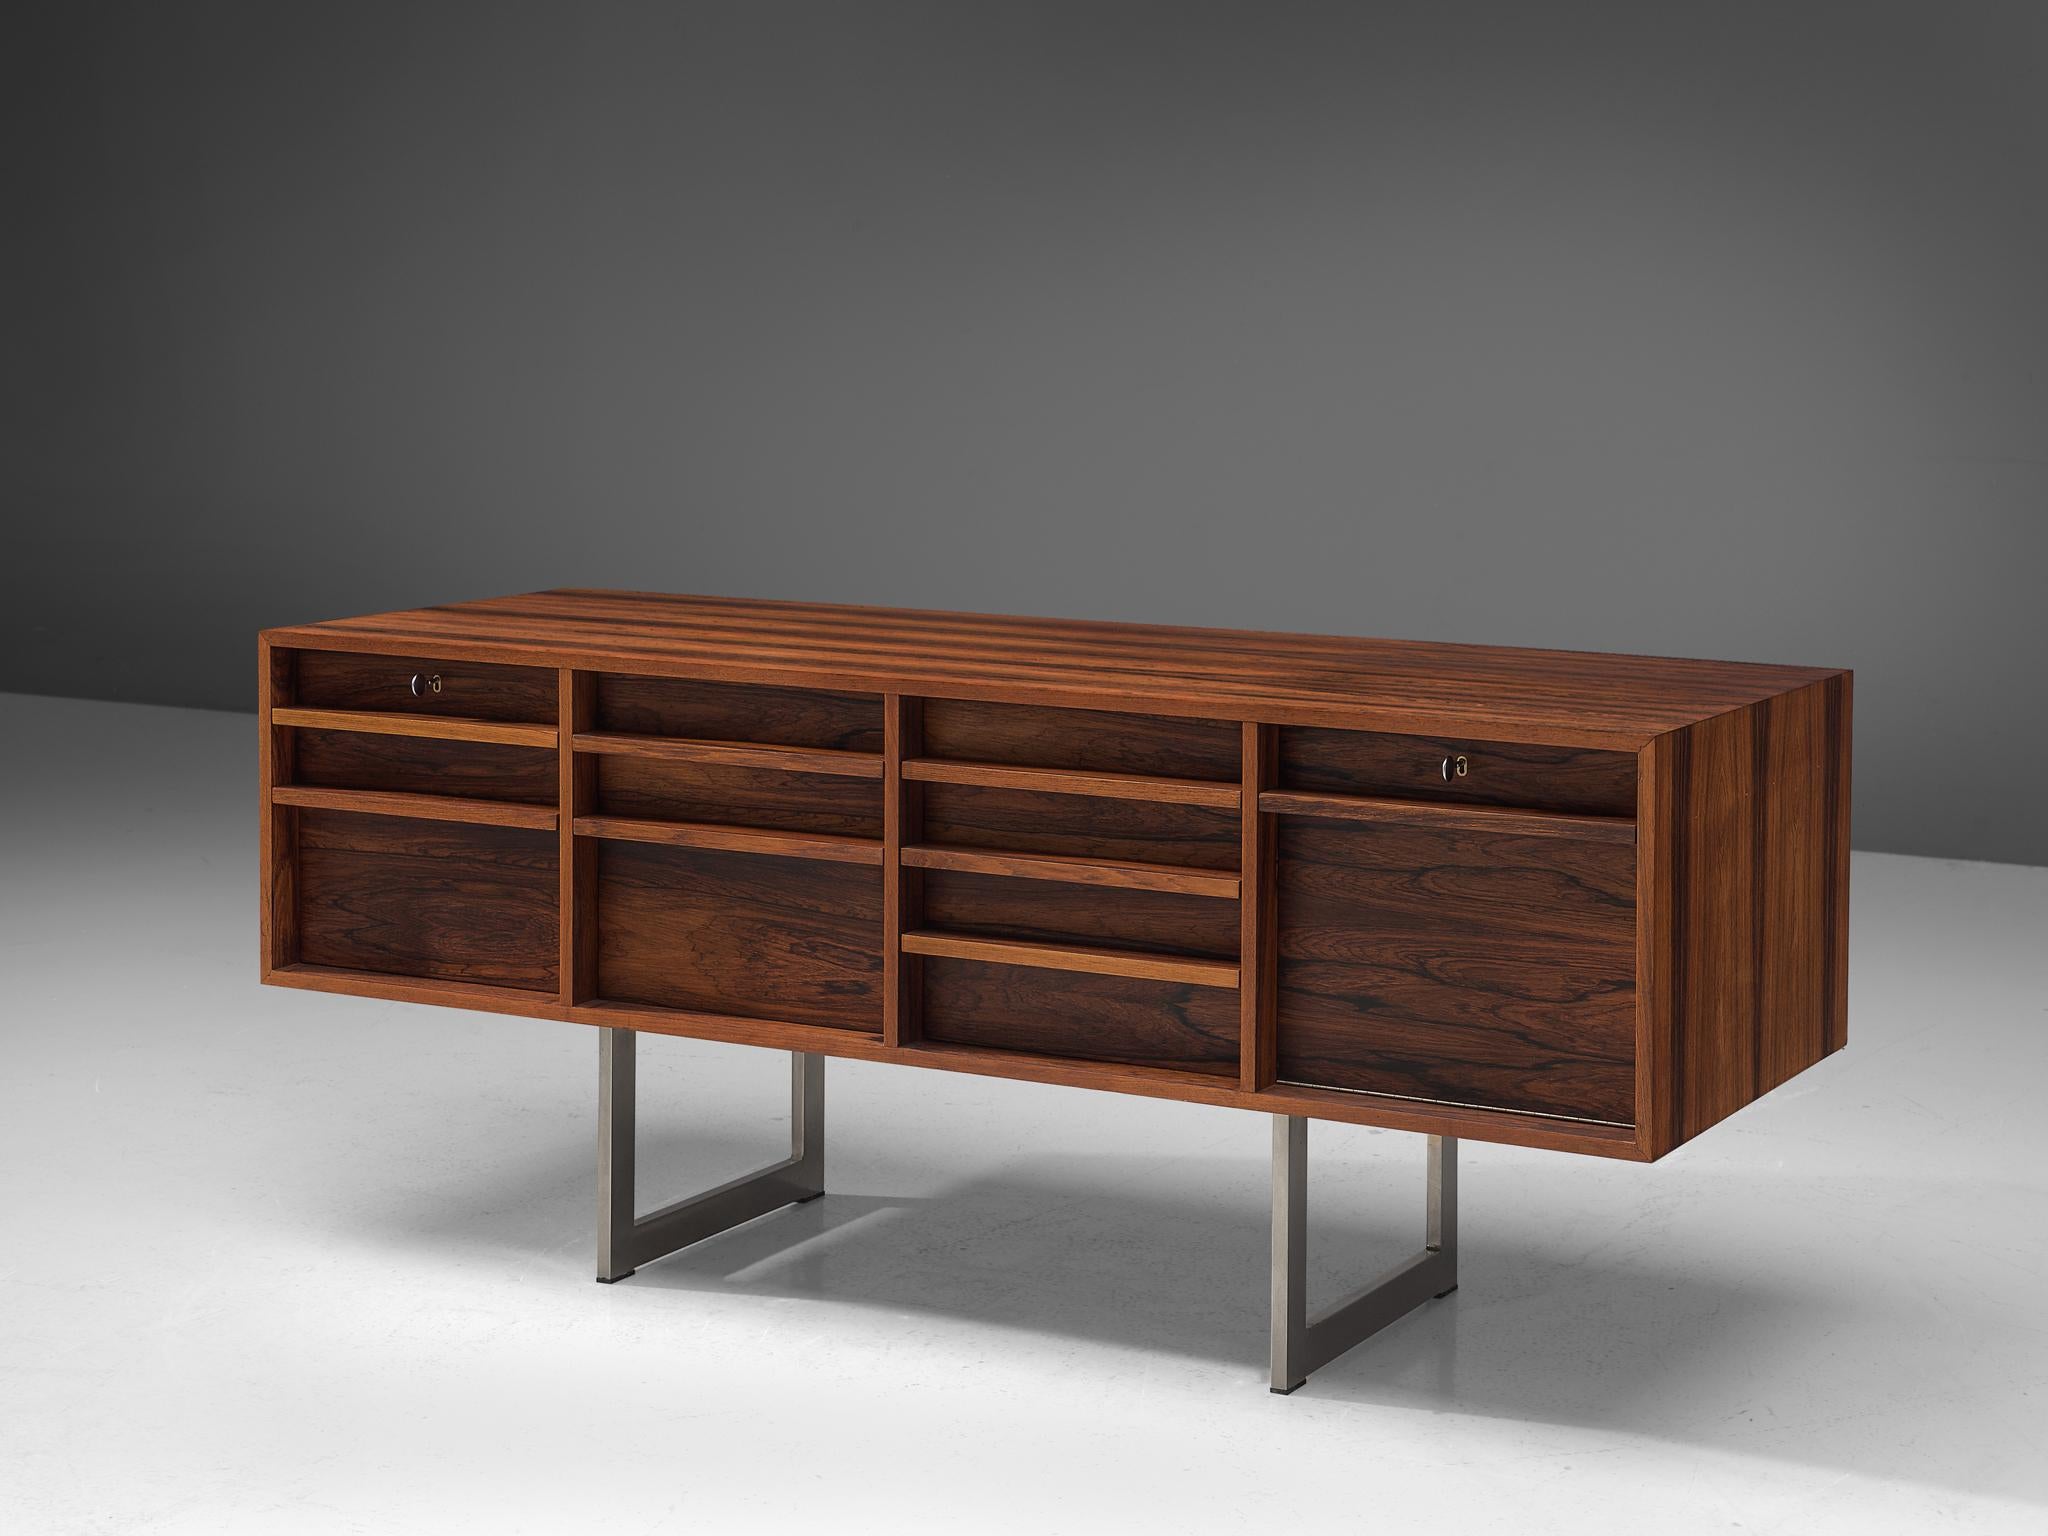 Bodil Kjaer for Pederson, sideboard model 911, in rosewood and metal, by Denmark, designed 1959, this example manufactured, 1960s-1970s.

Freestanding sideboard in rosewood by Danish designer Bodil Kjaer. Absolute stunning credenza. This cabinet